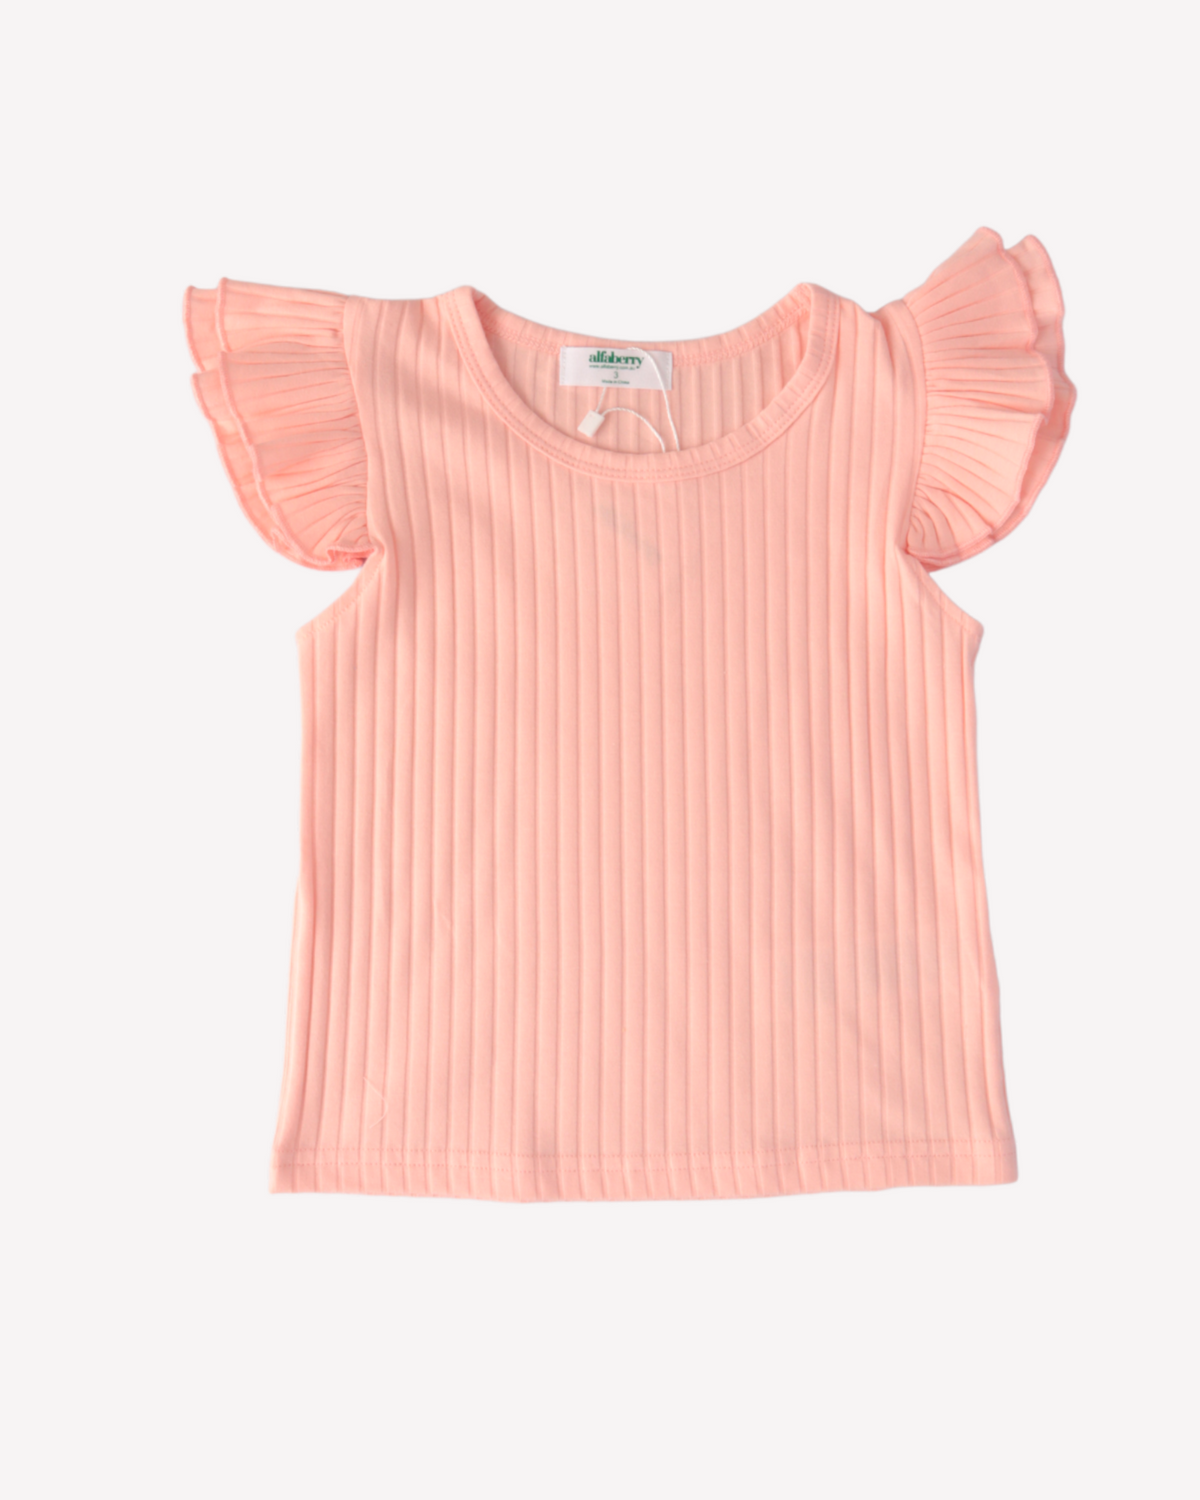 Ribbed Full Flutter Top in Peachy Pink